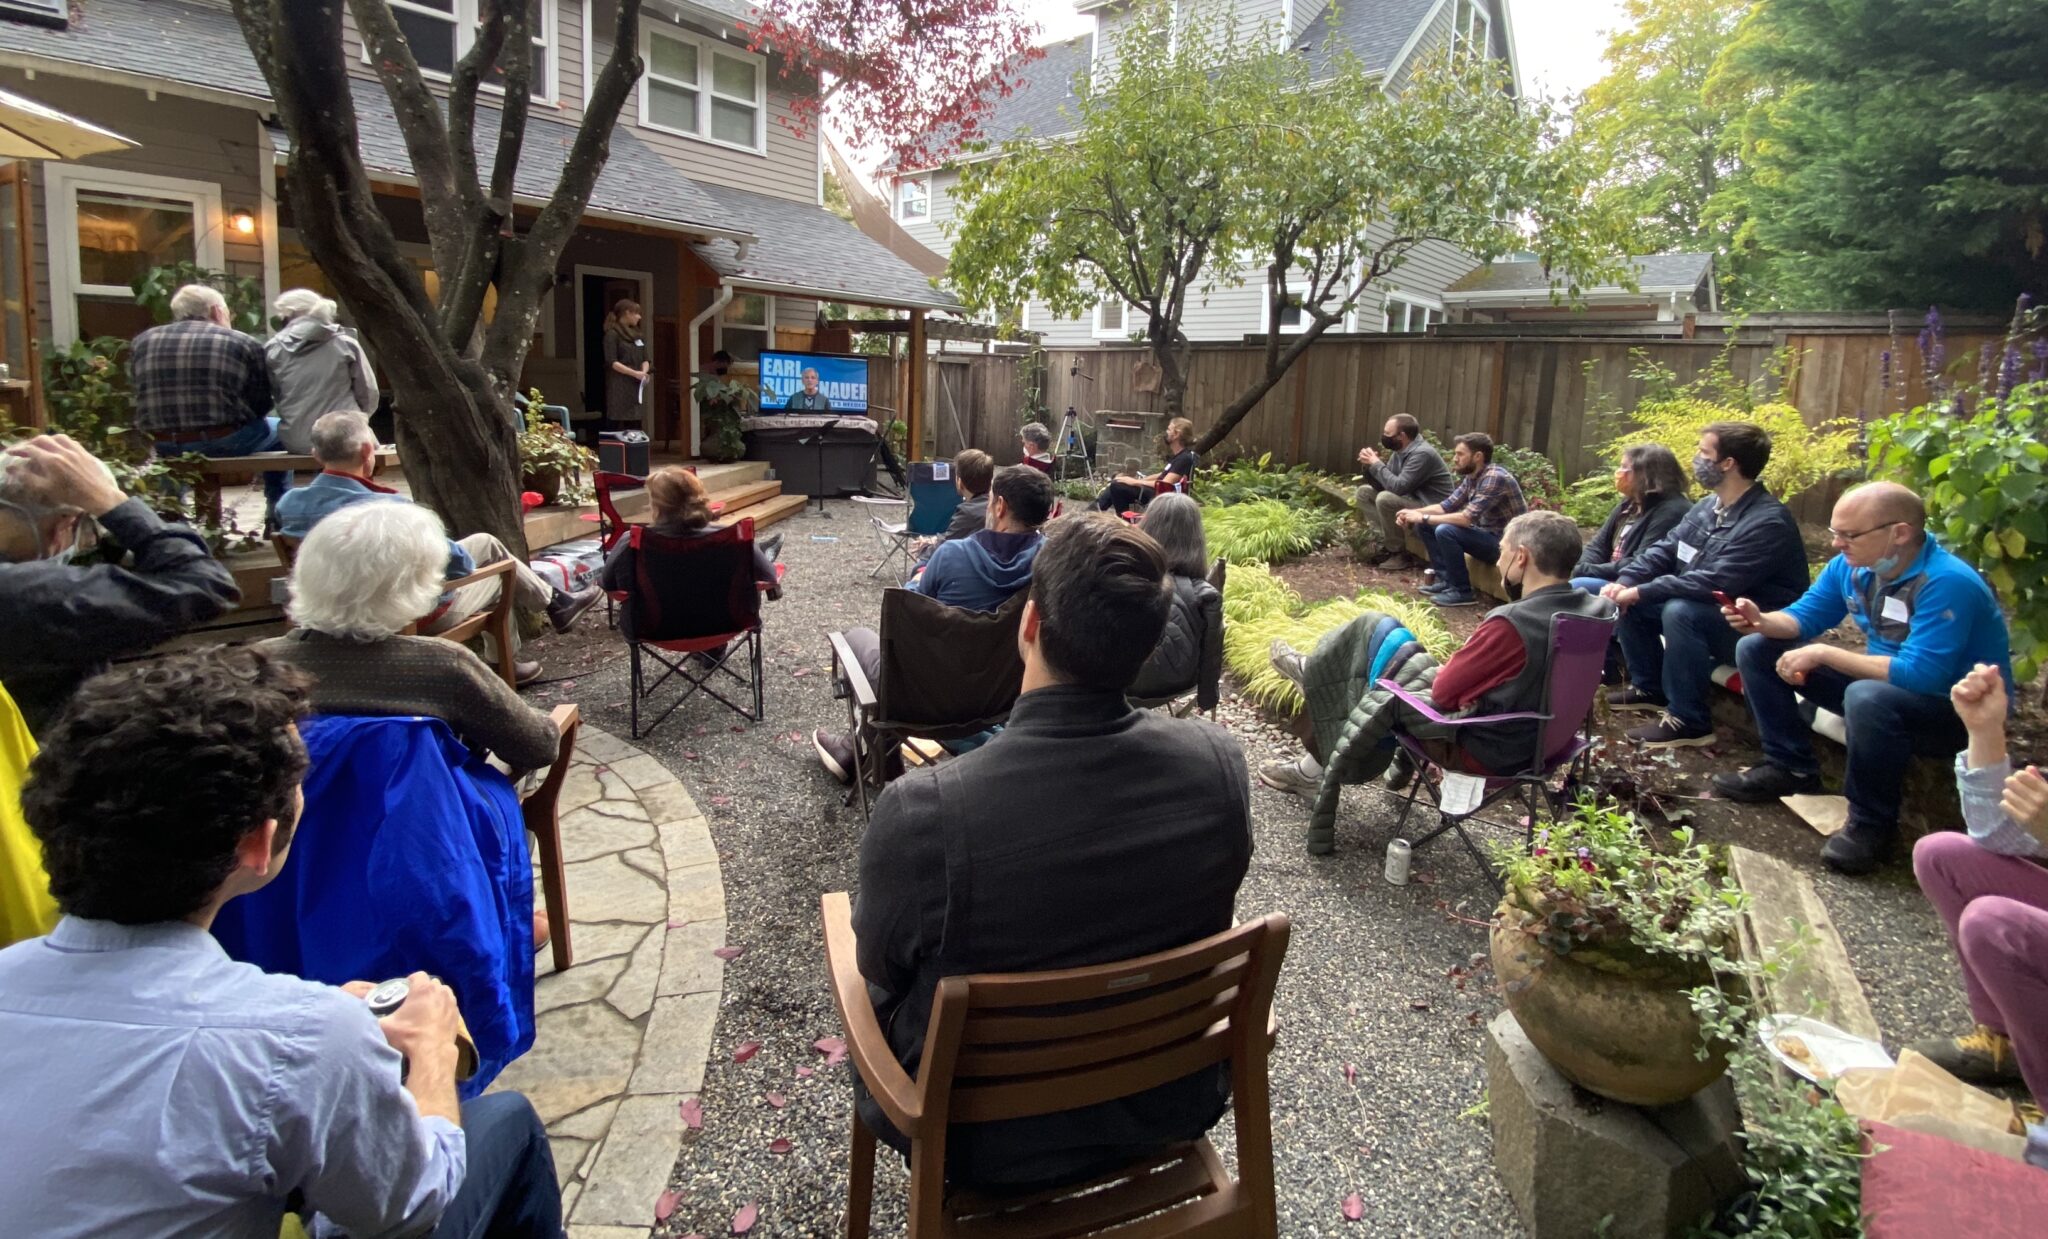 Photo of a Parking Reform Network event in a backyard. People are sitting around on chairs watching a video address by Earl Blumenauer.